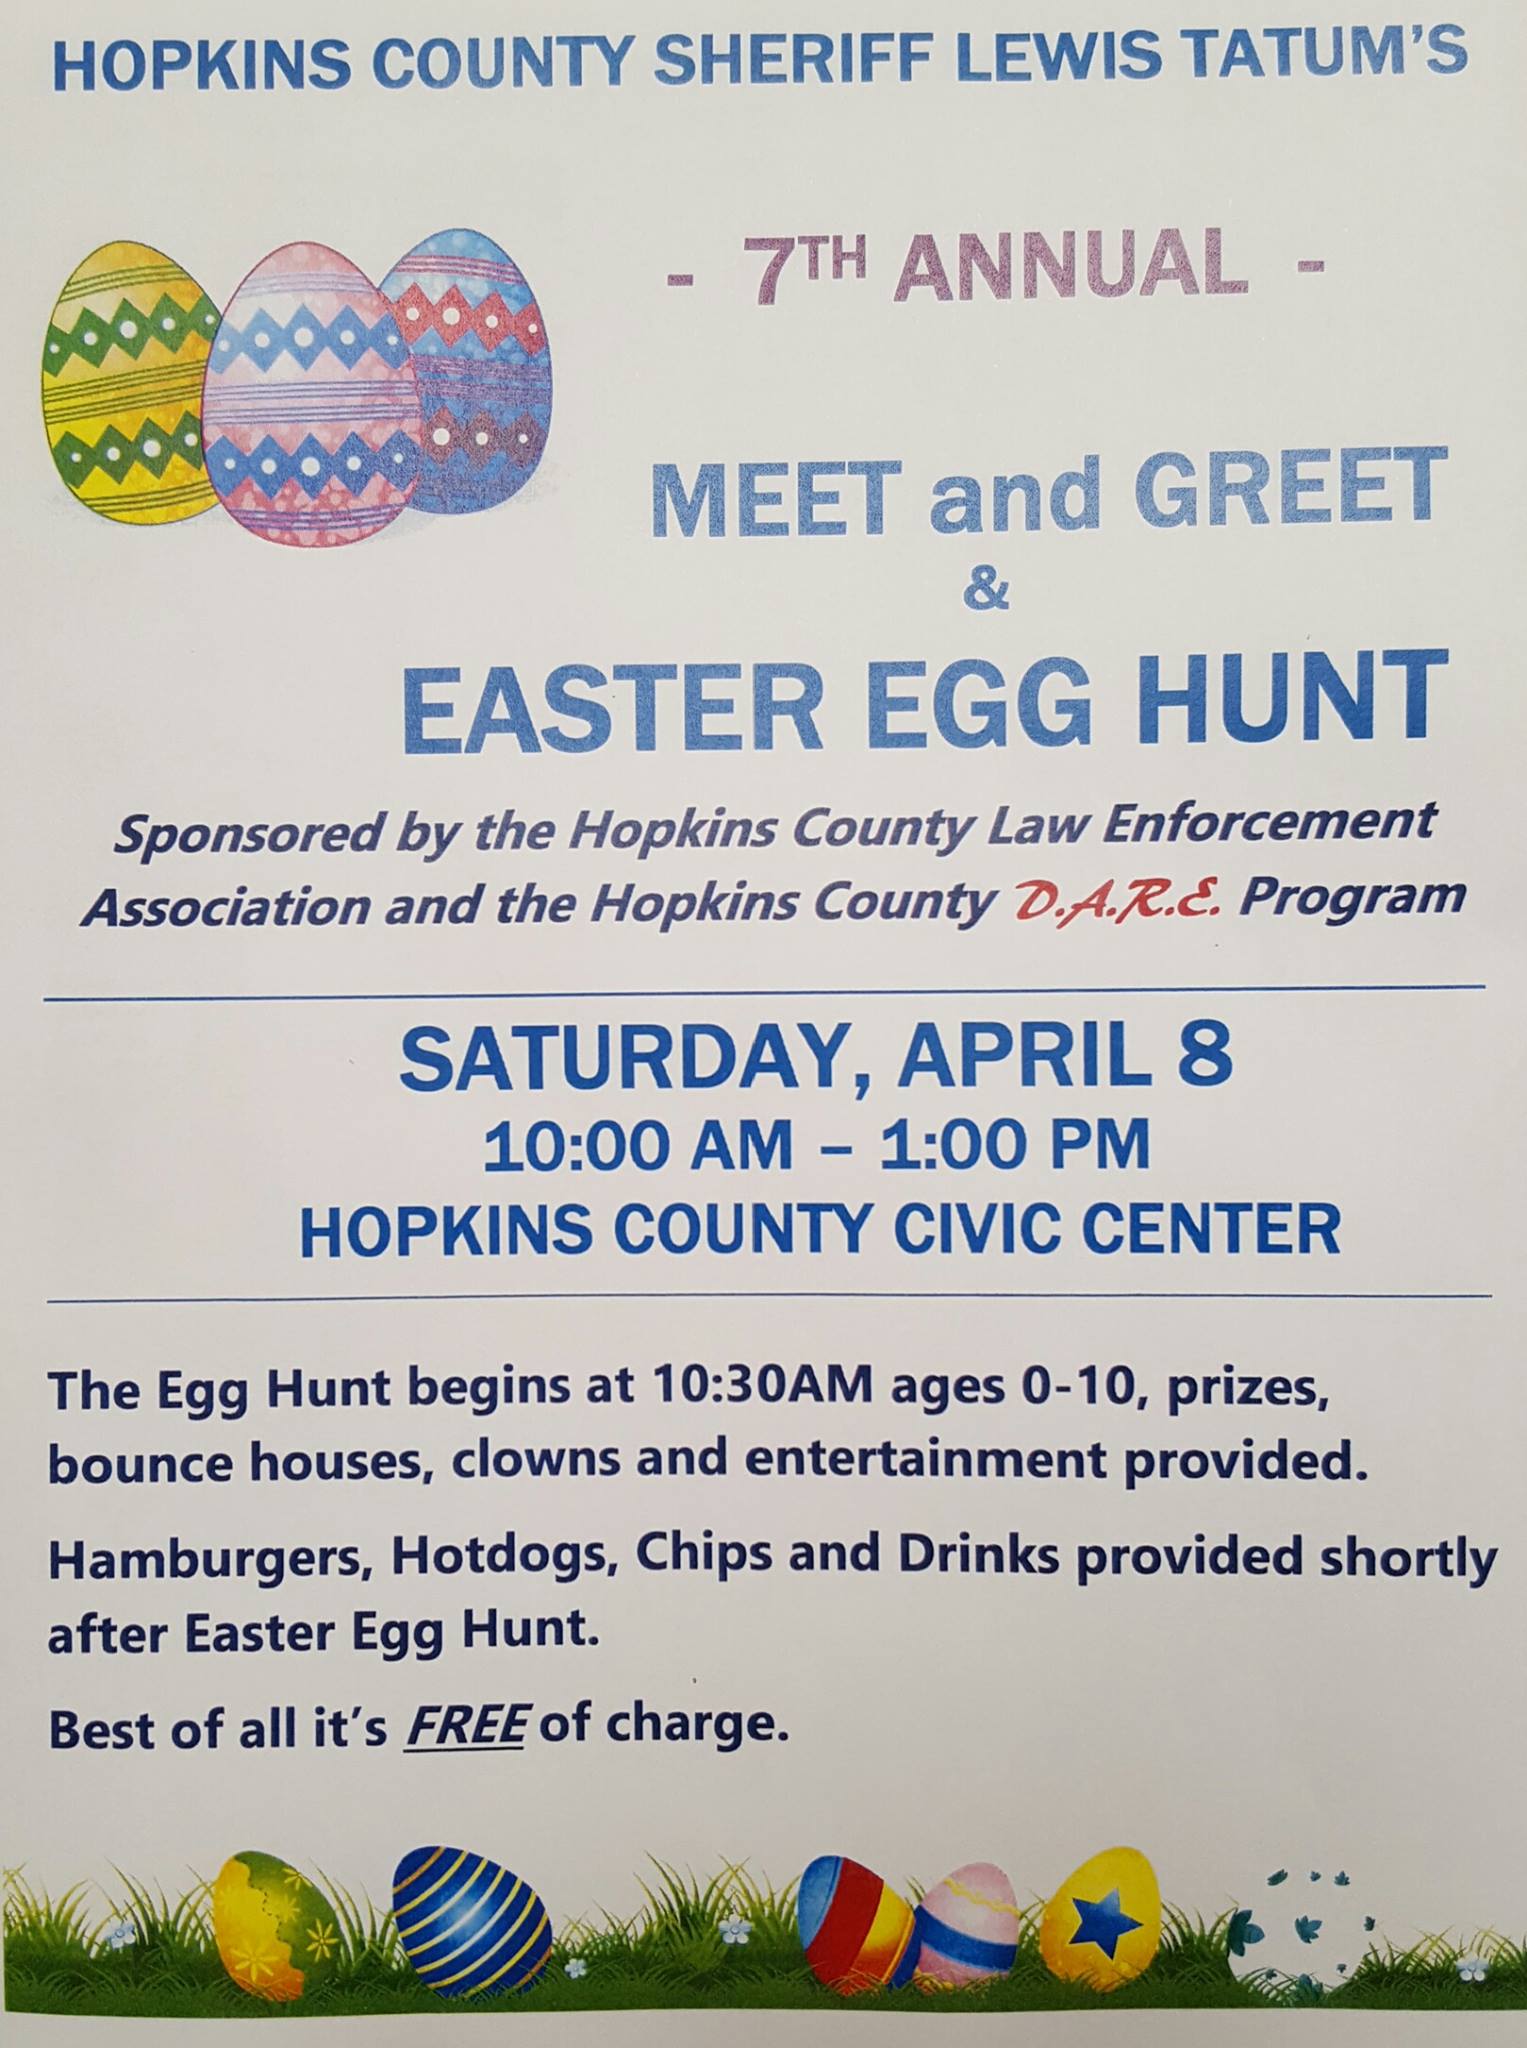 Hopkins County Sheriff Lewis Tatum’s 7th Annual Meet & Greet and Easter Egg Hunt April 8th